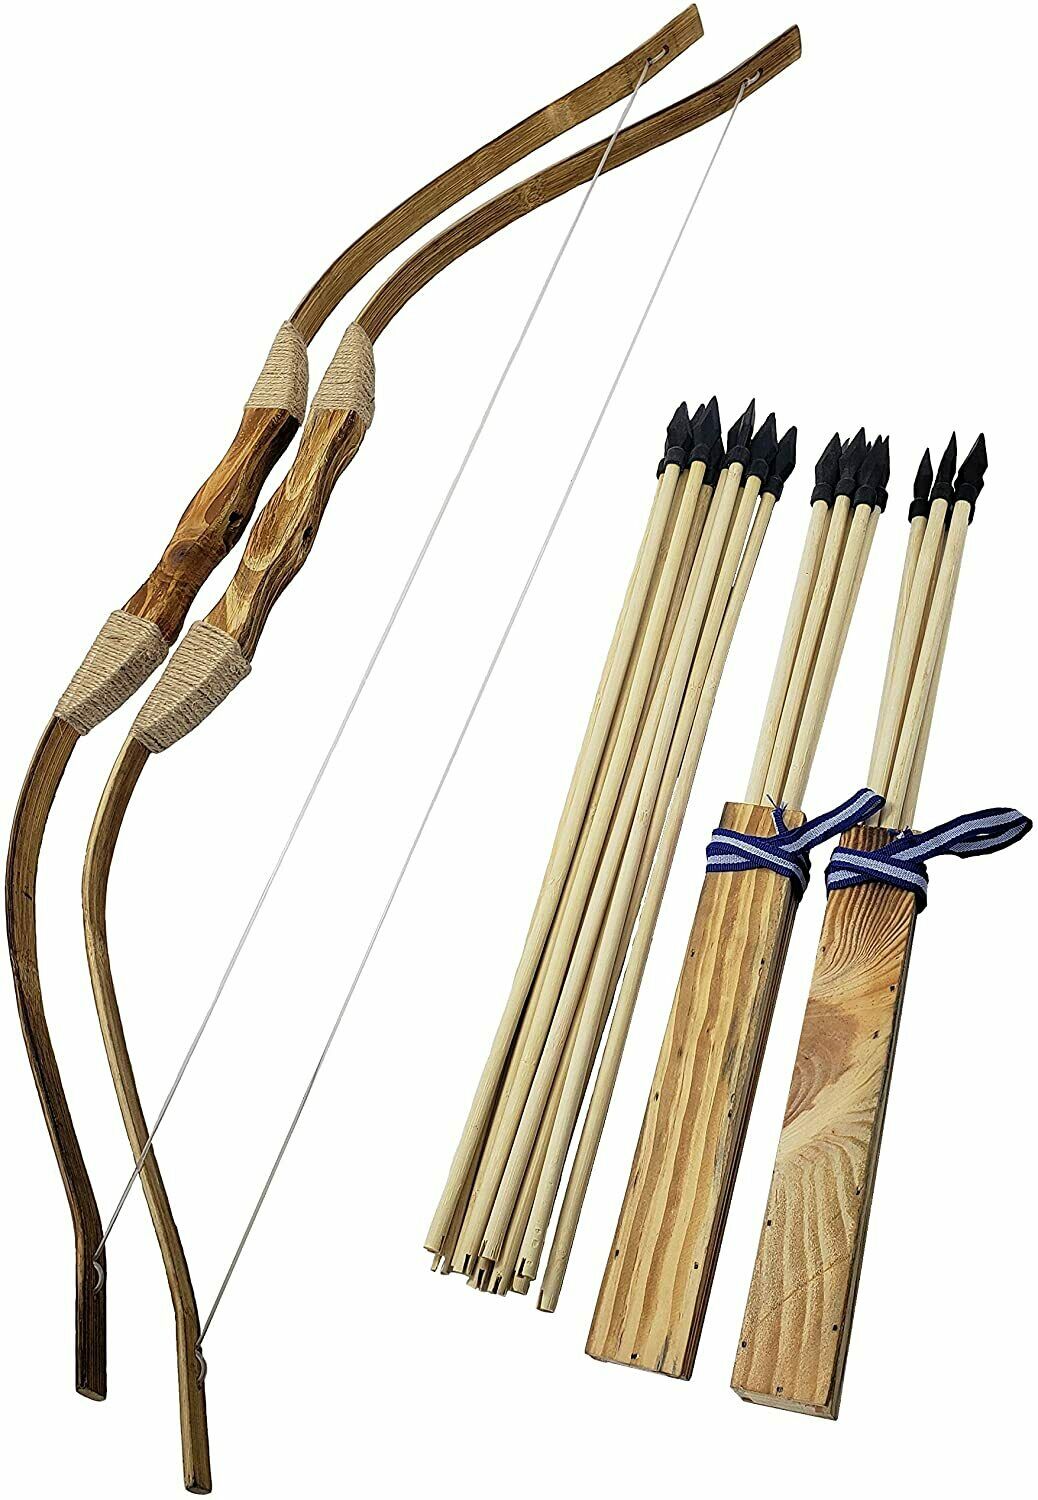 2 Pack Handmade Wooden Bow And Arrow Set W/ 20 Wood Arrows Outdoor Hunting Games